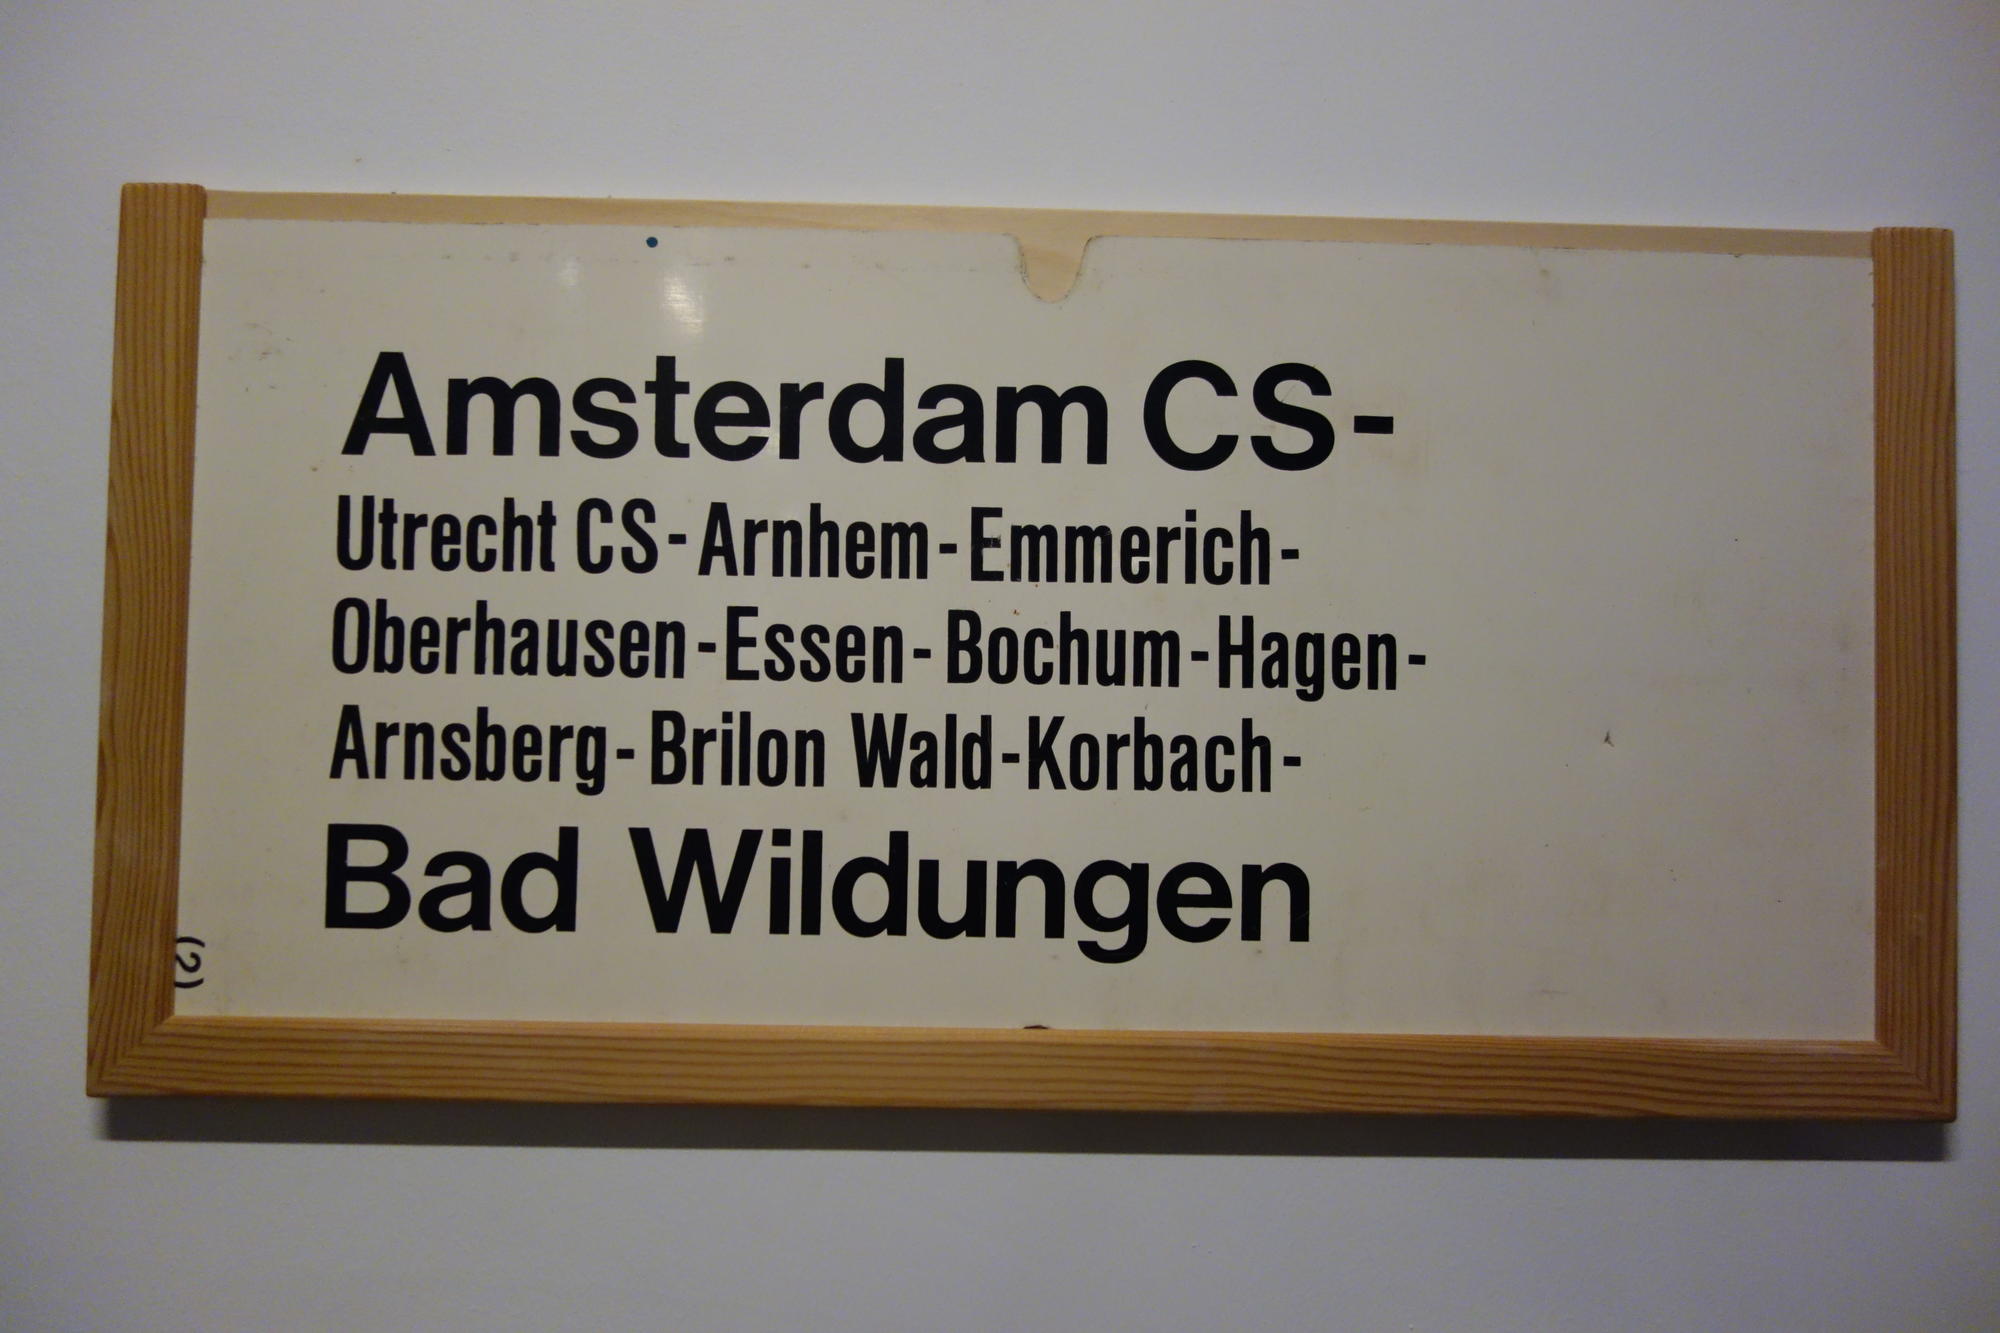 Train destination sign: A direct connection between Amsterdam and Bad Wildungen